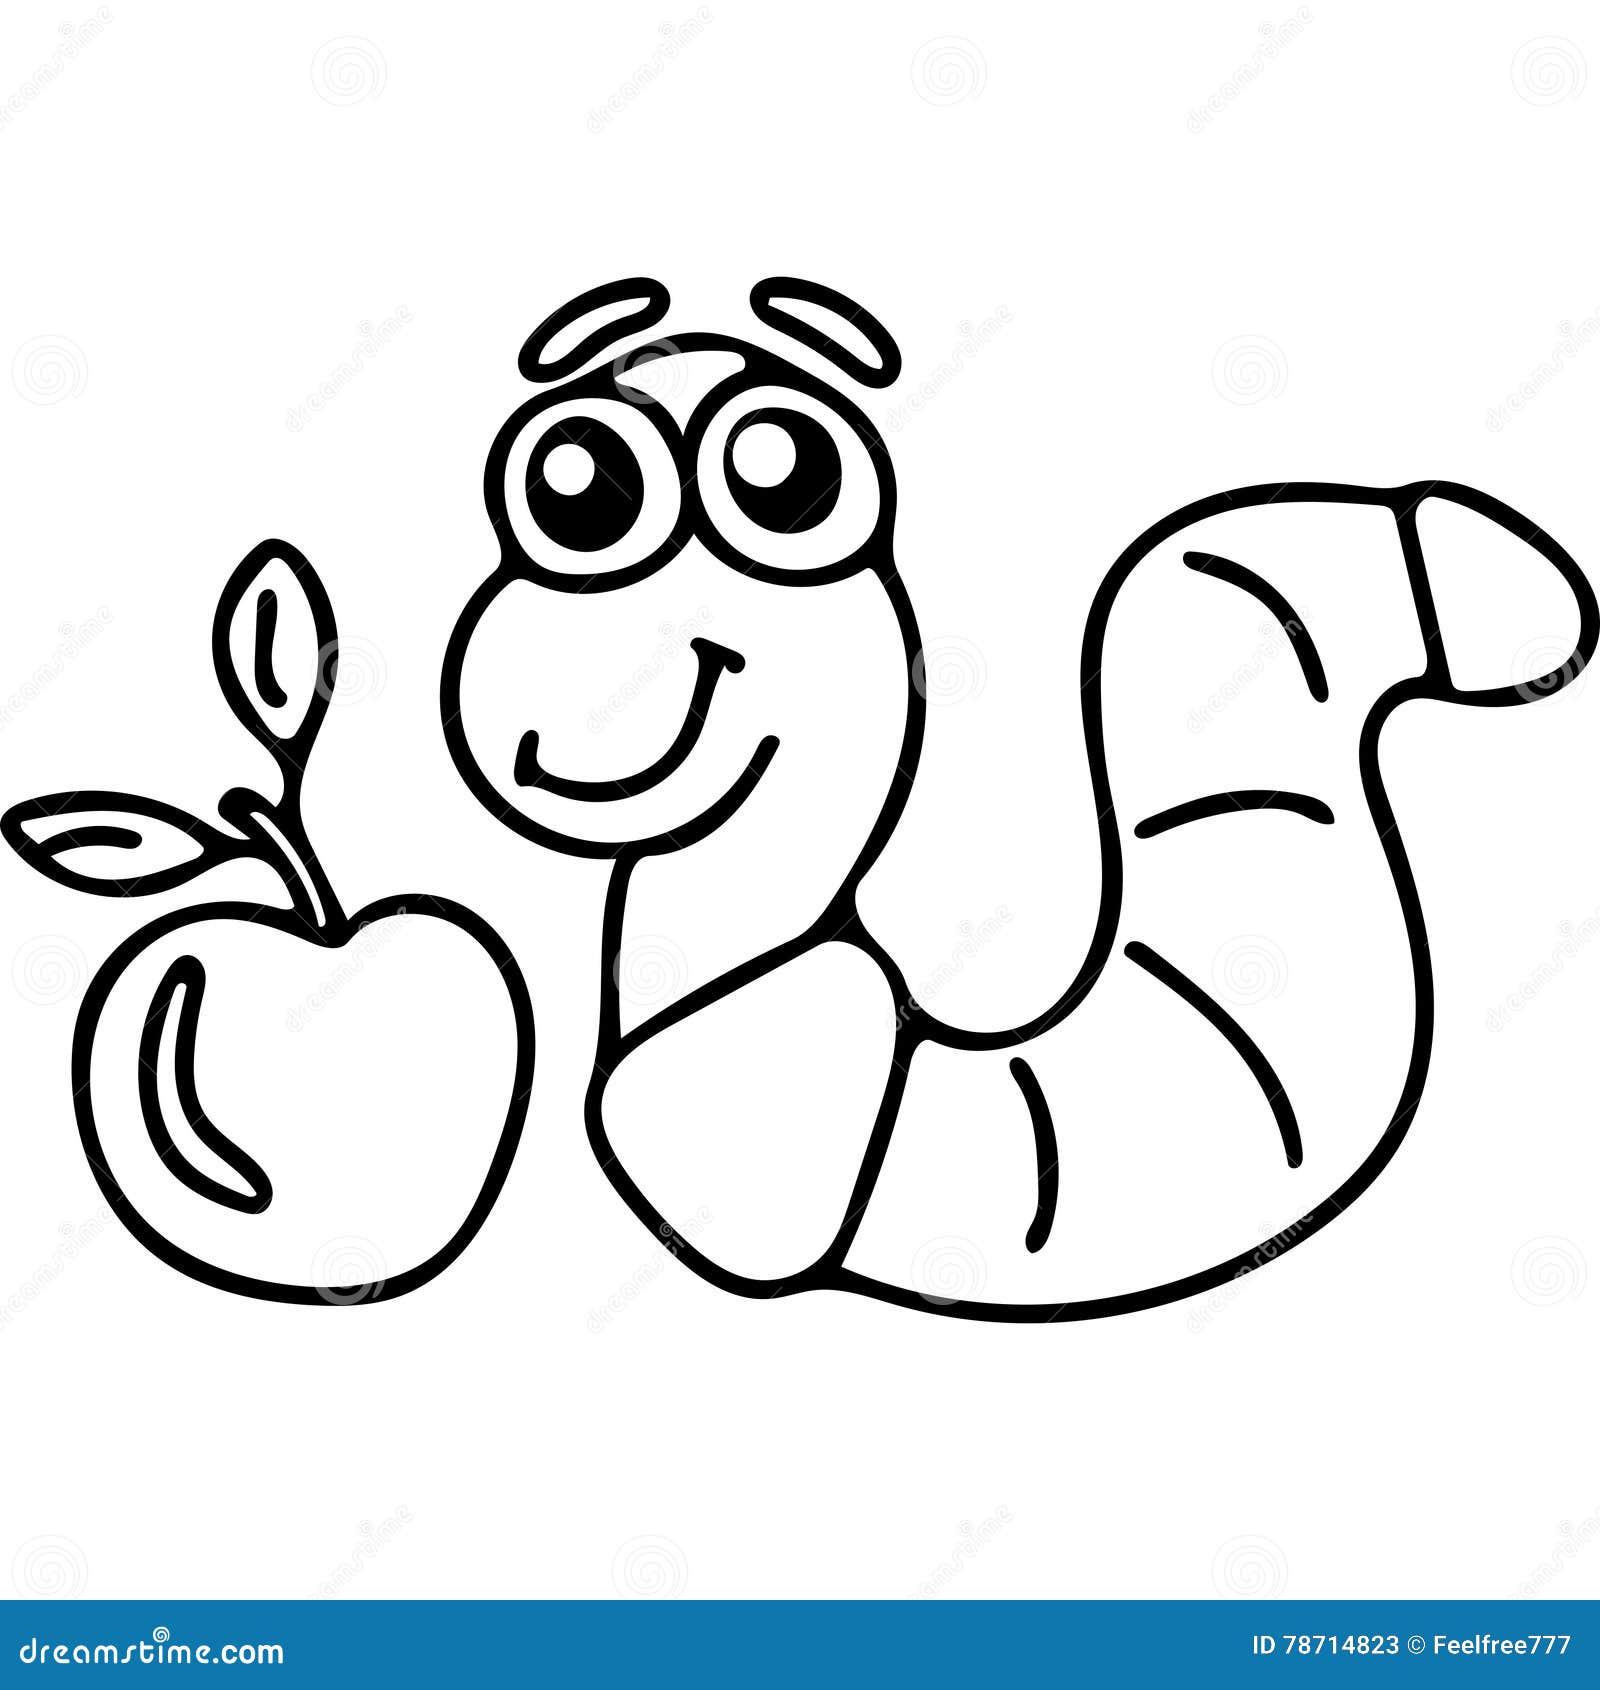 Worm kids coloring page stock illustration. Illustration of food